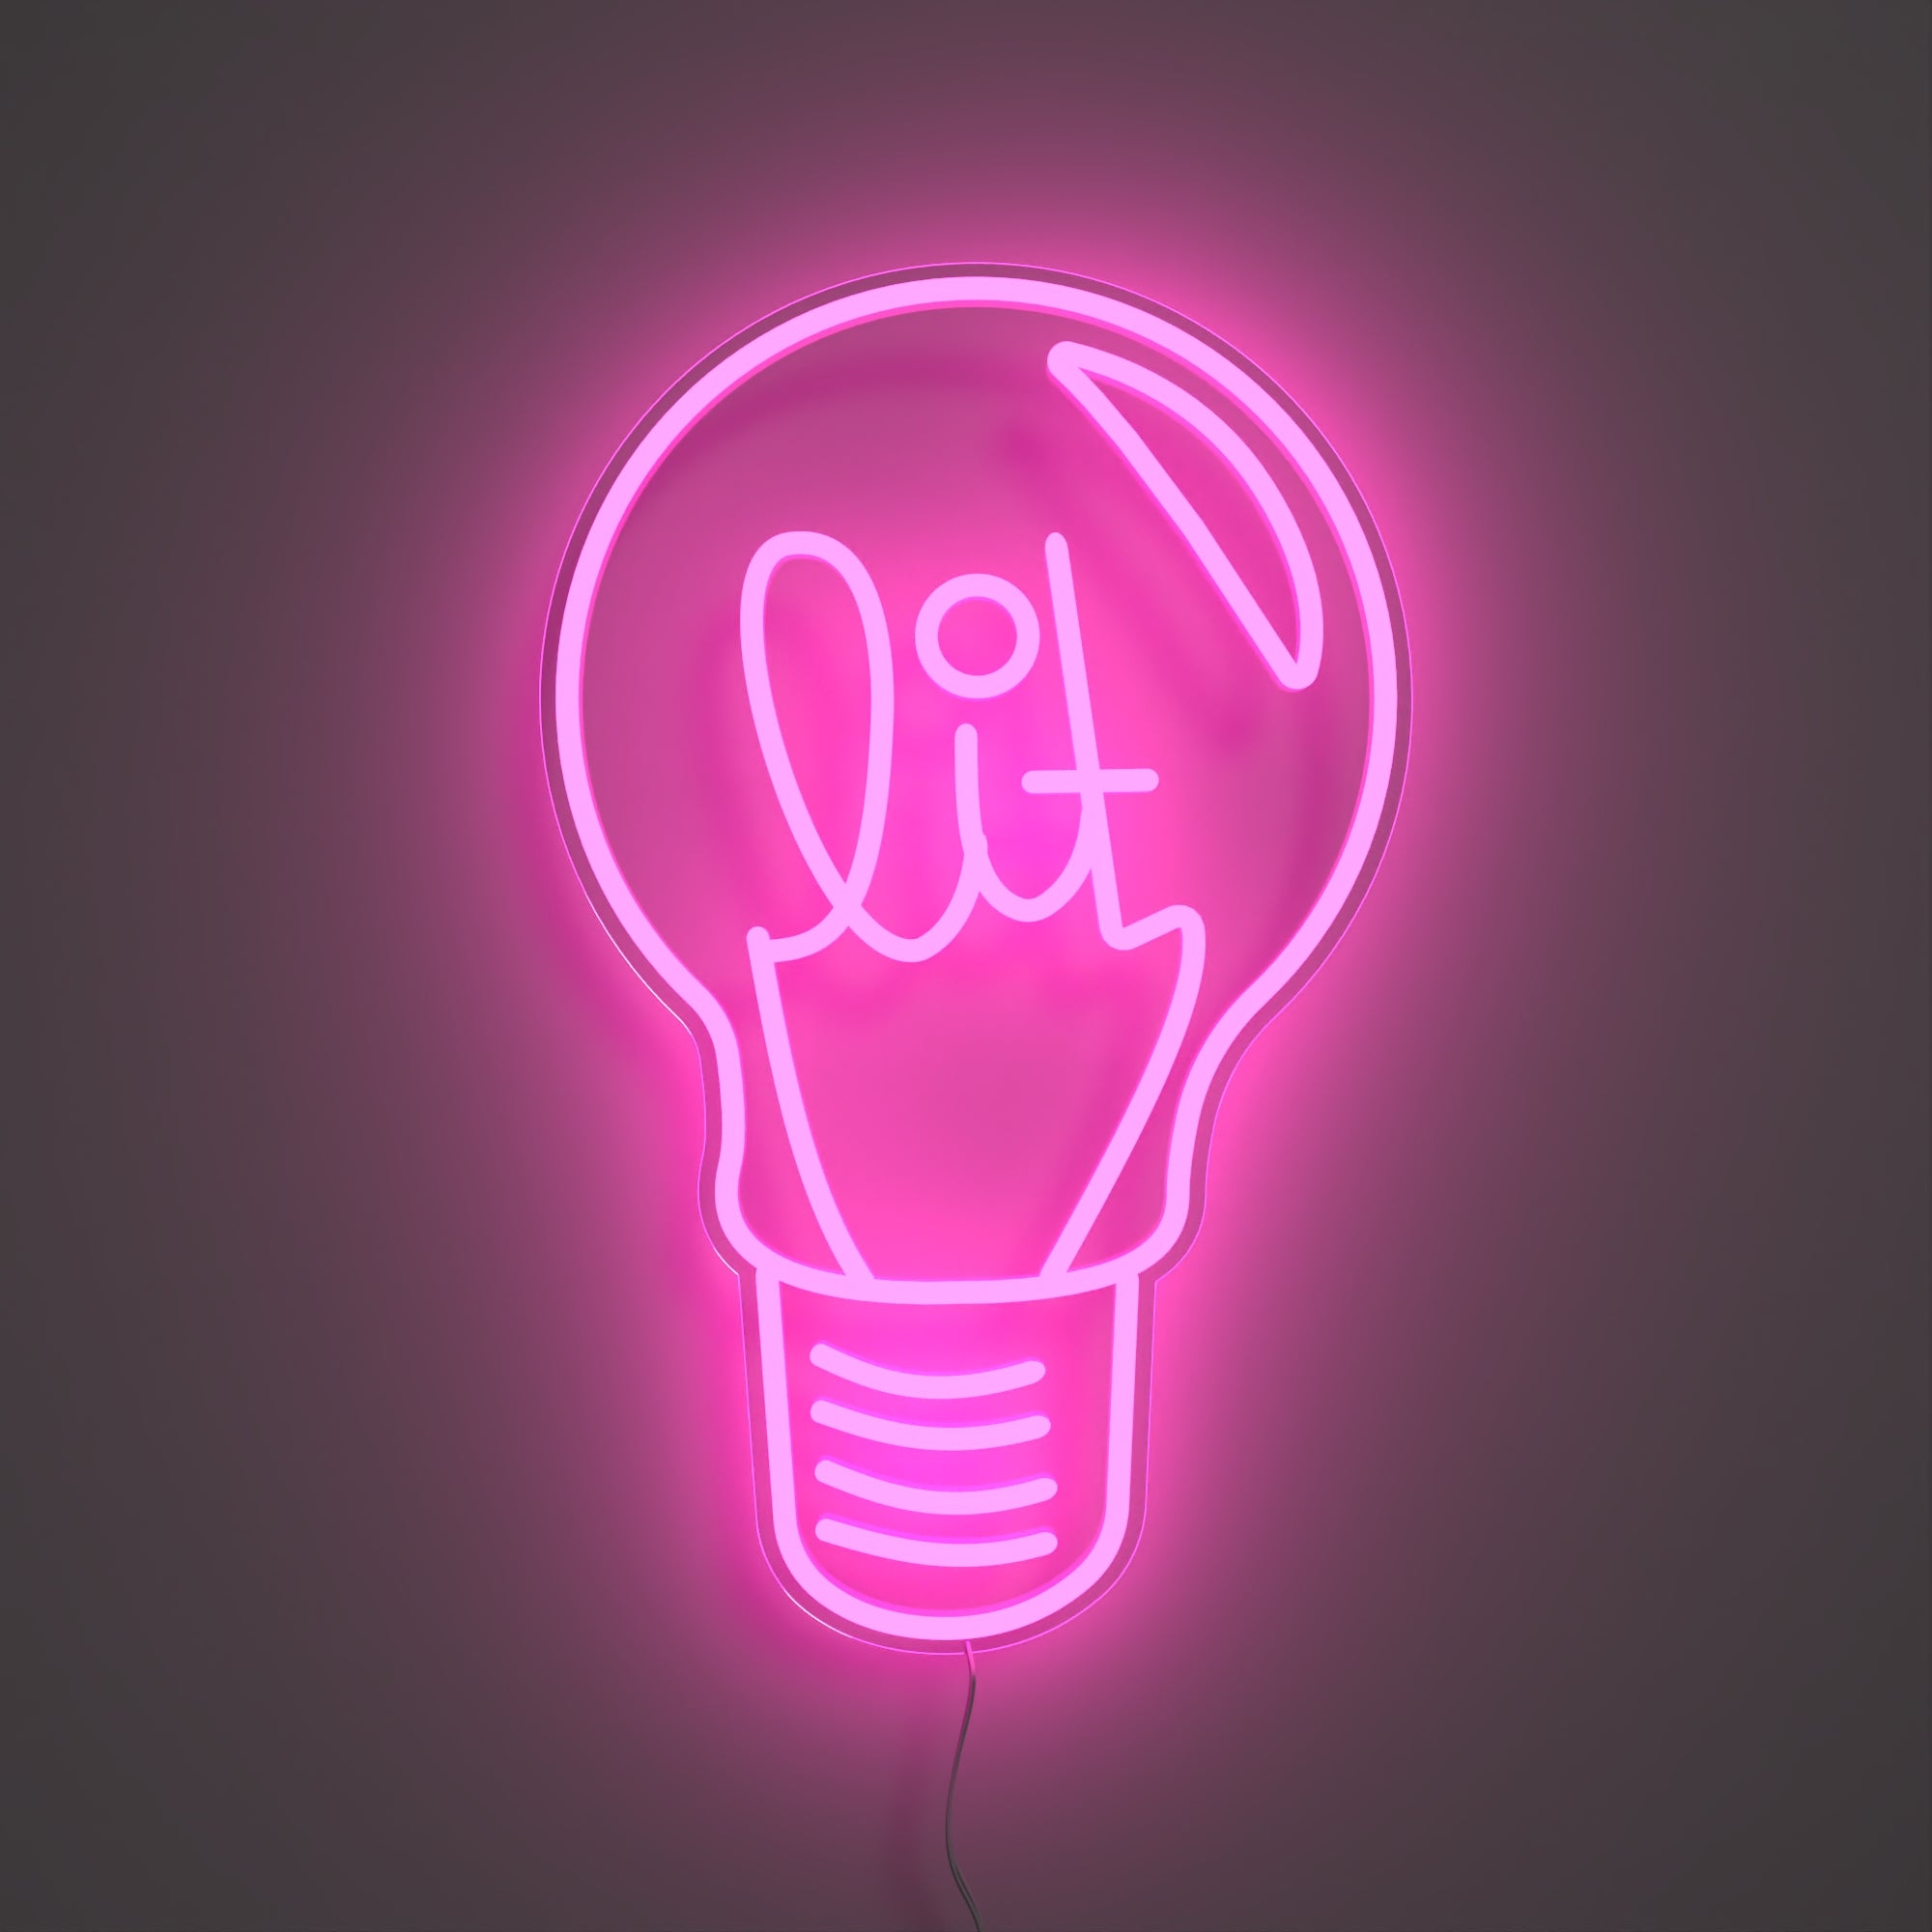 Light it up - LED neon sign